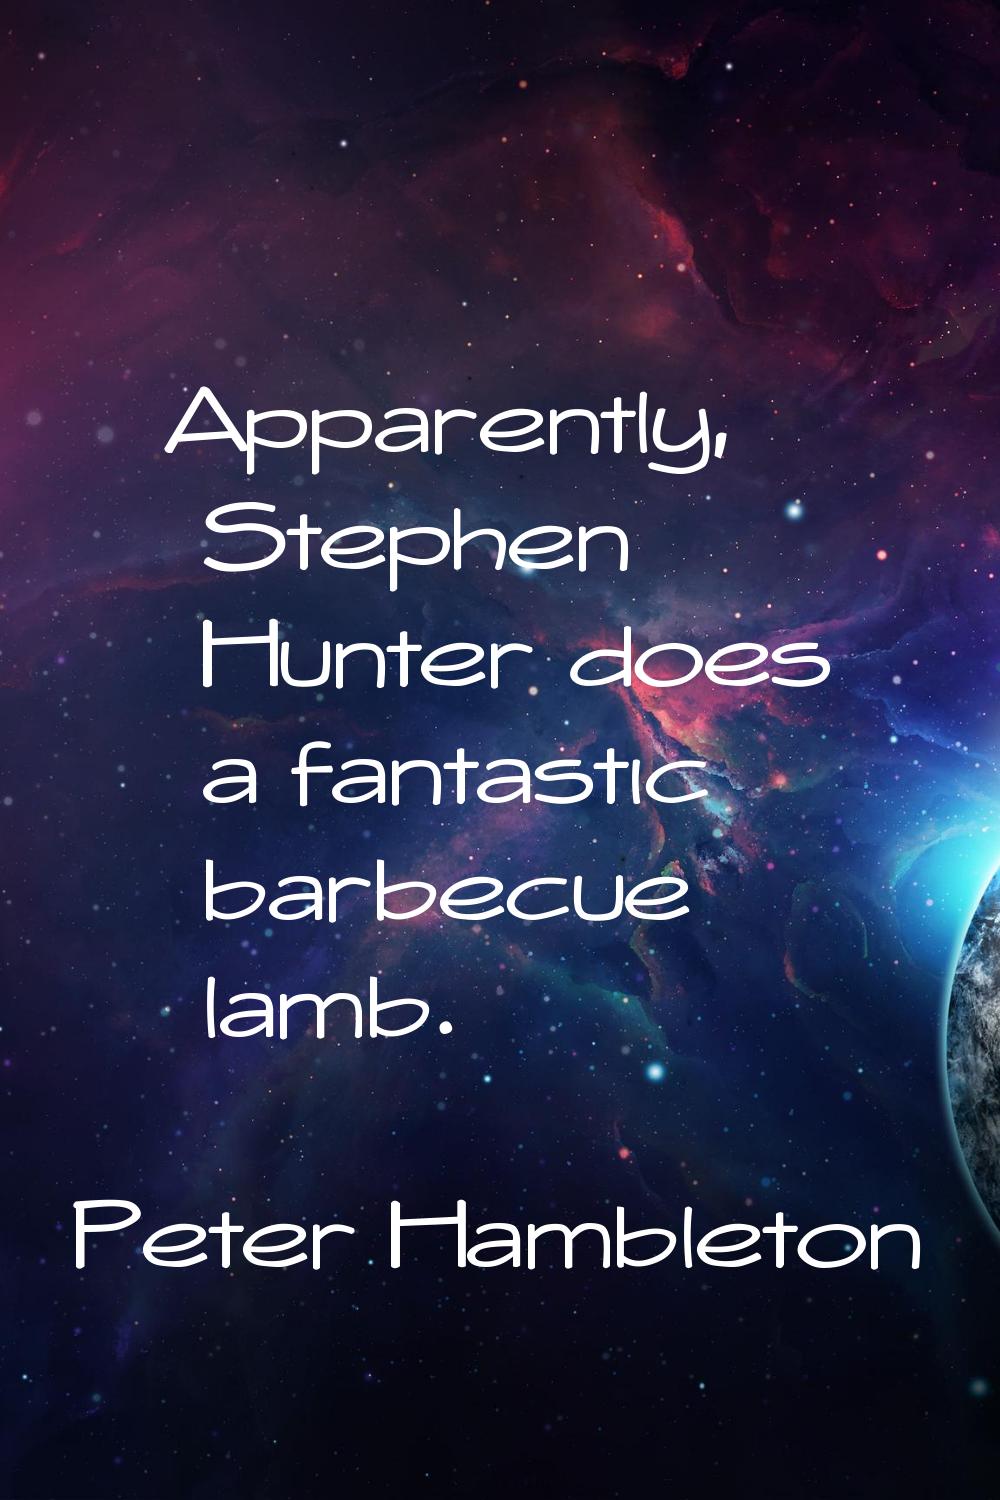 Apparently, Stephen Hunter does a fantastic barbecue lamb.